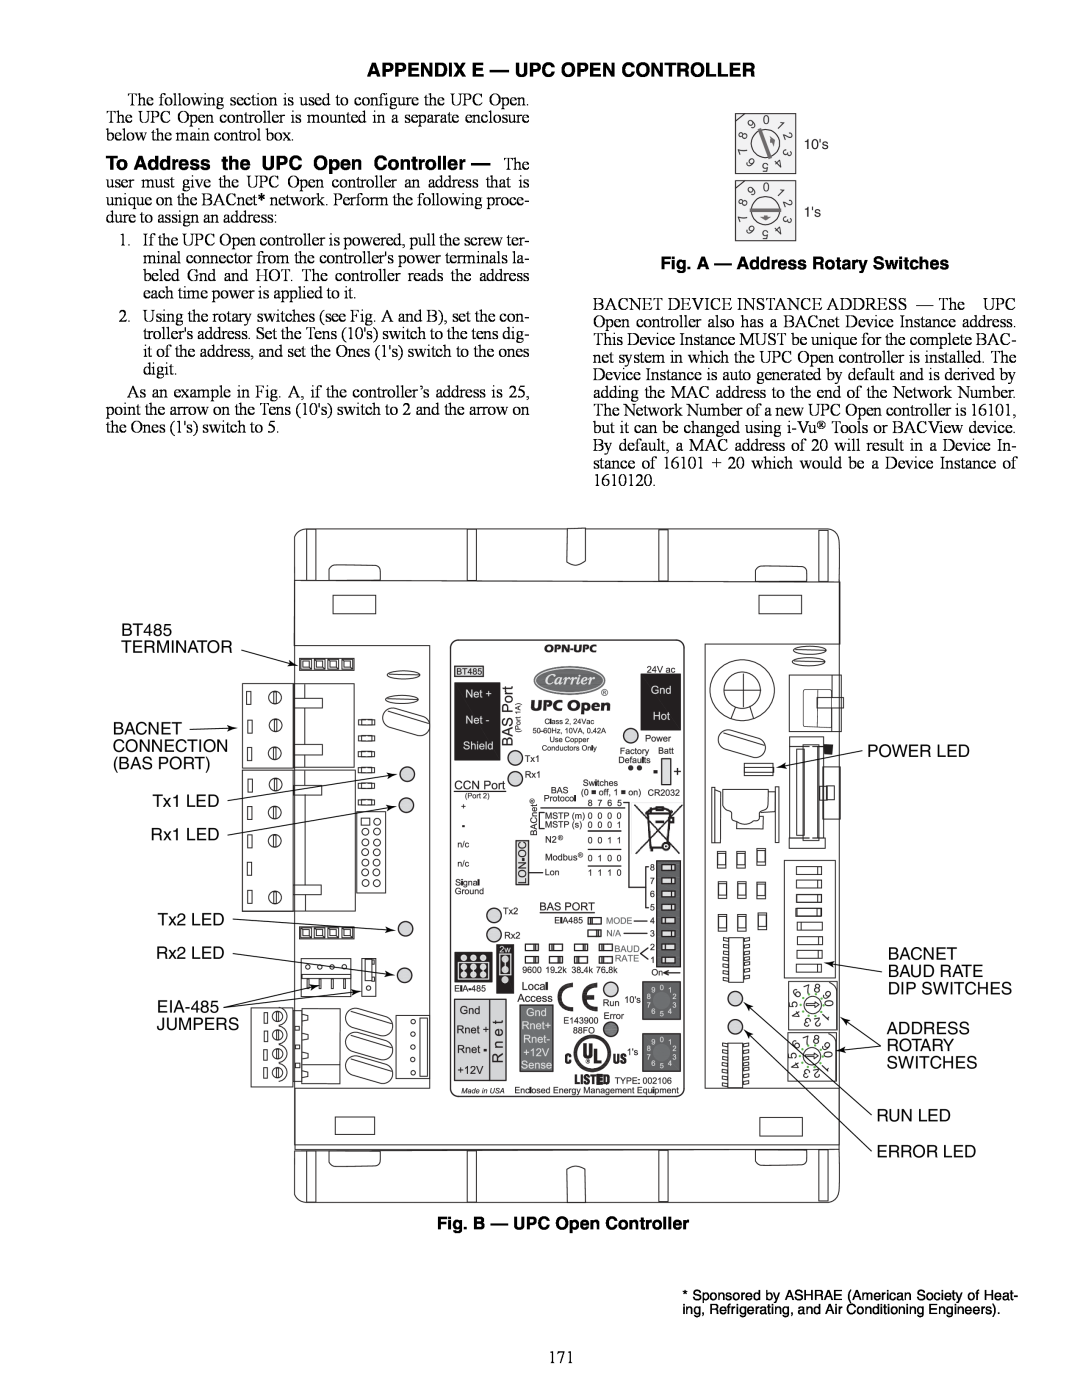 Carrier 48/50AJ Appendix E — Upc Open Controller, Fig. A — Address Rotary Switches, Fig. B — UPC Open Controller 